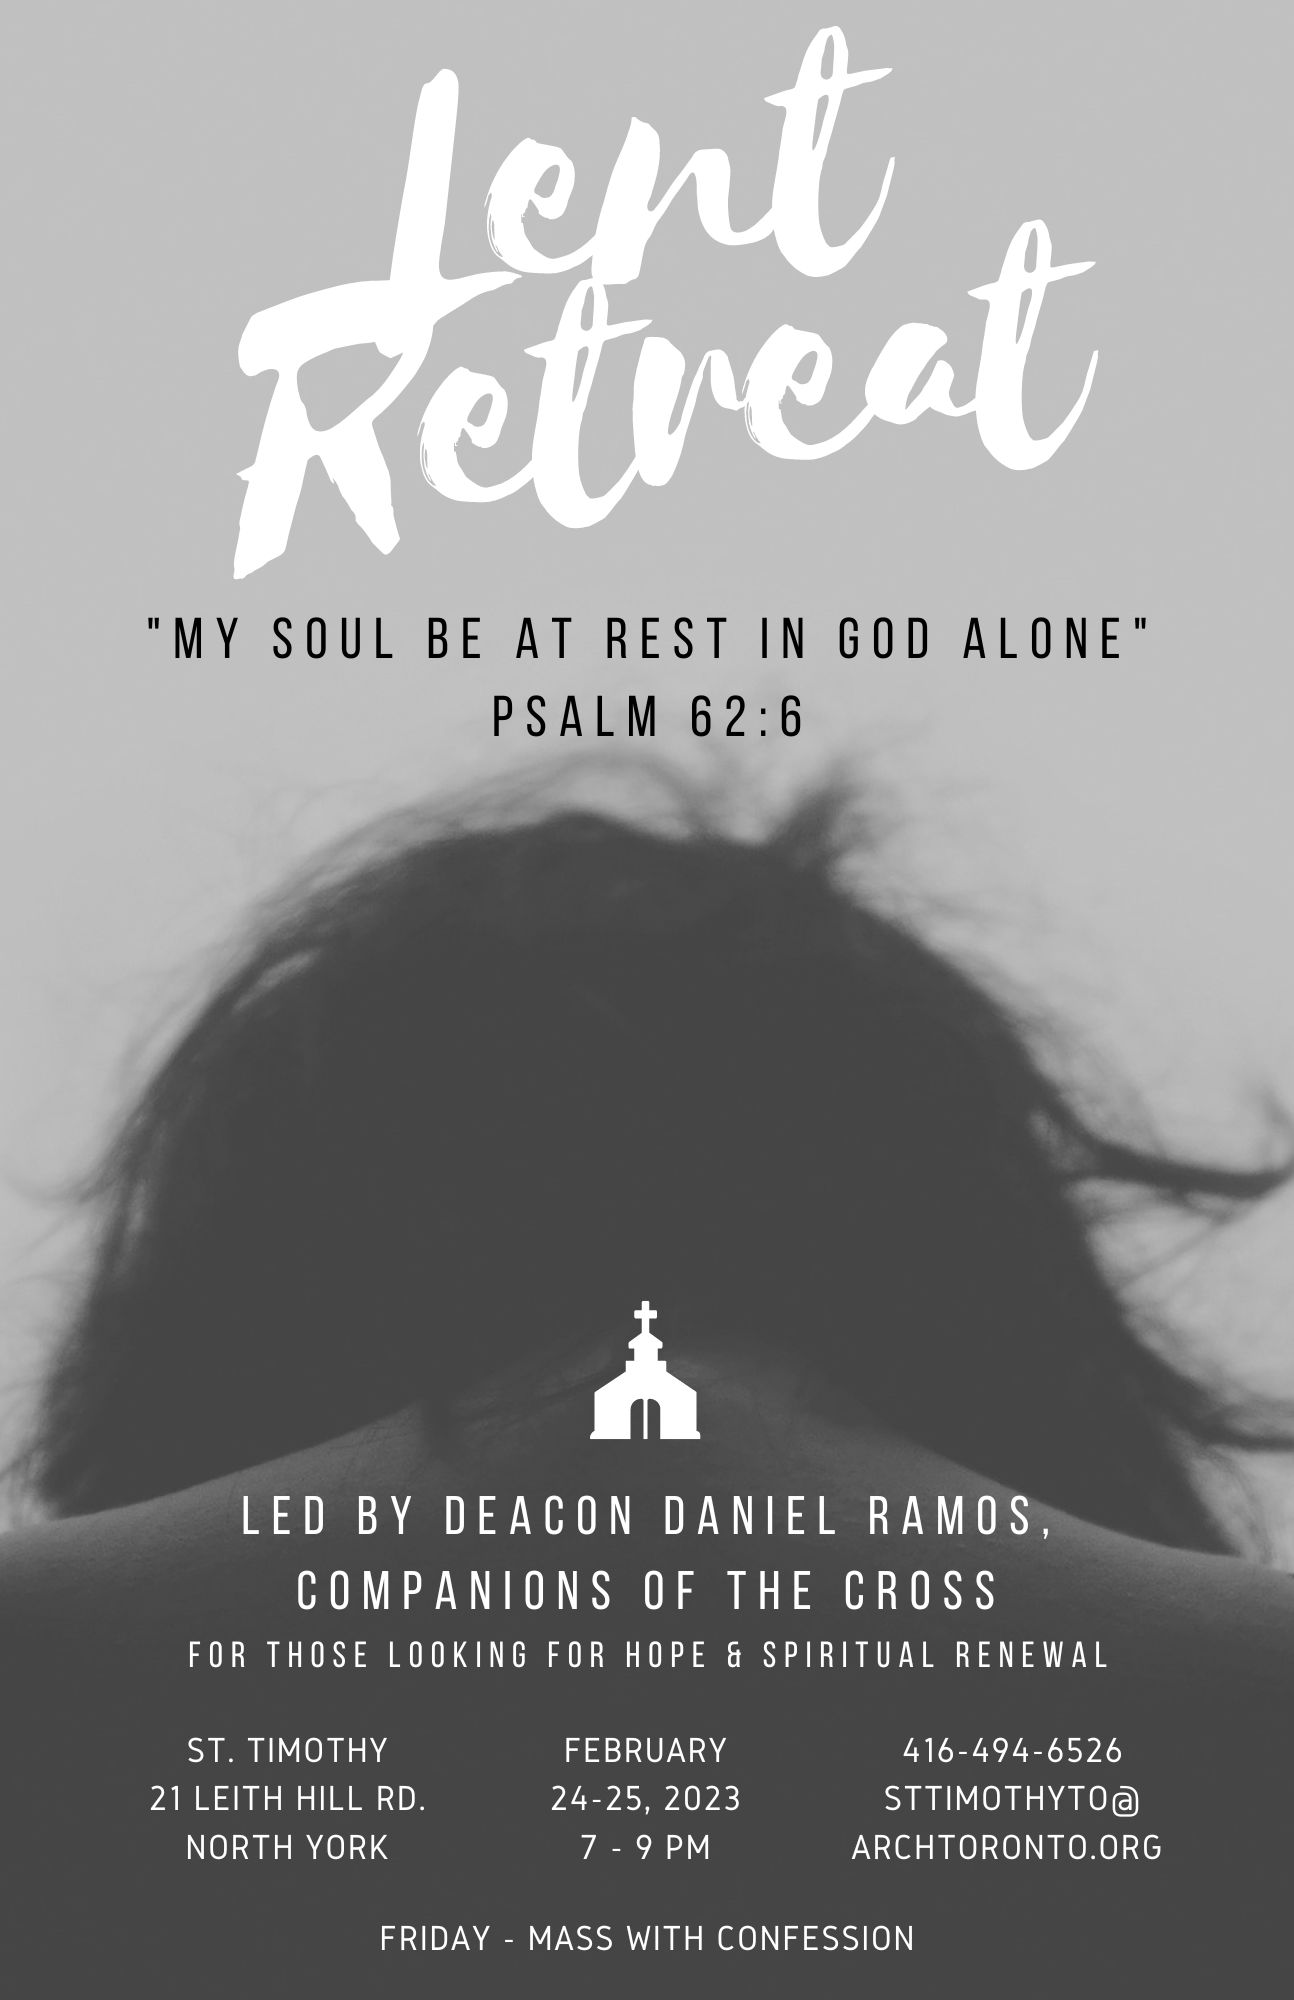 Poster to promote Lent Retreat event at St. Timothy Parish on February 24 and February 25 from 7 to 9 PM